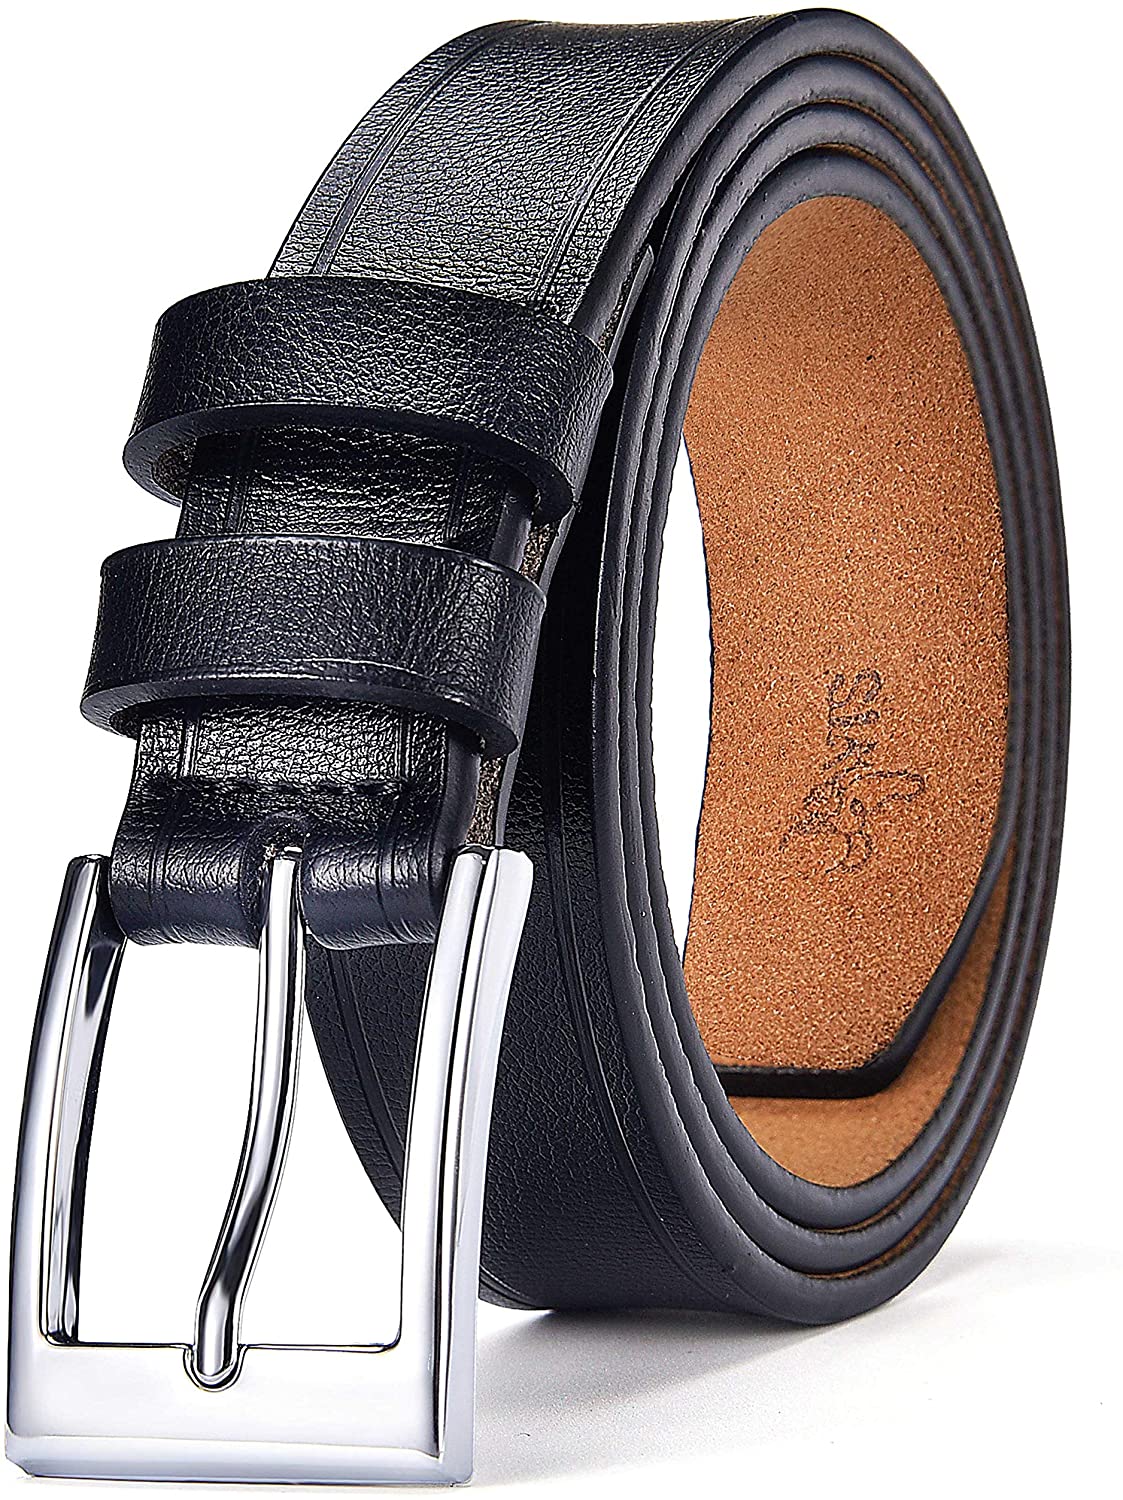 DWTS Mens Belts Leather Classic Casual Dress Belt with Single Prong ...